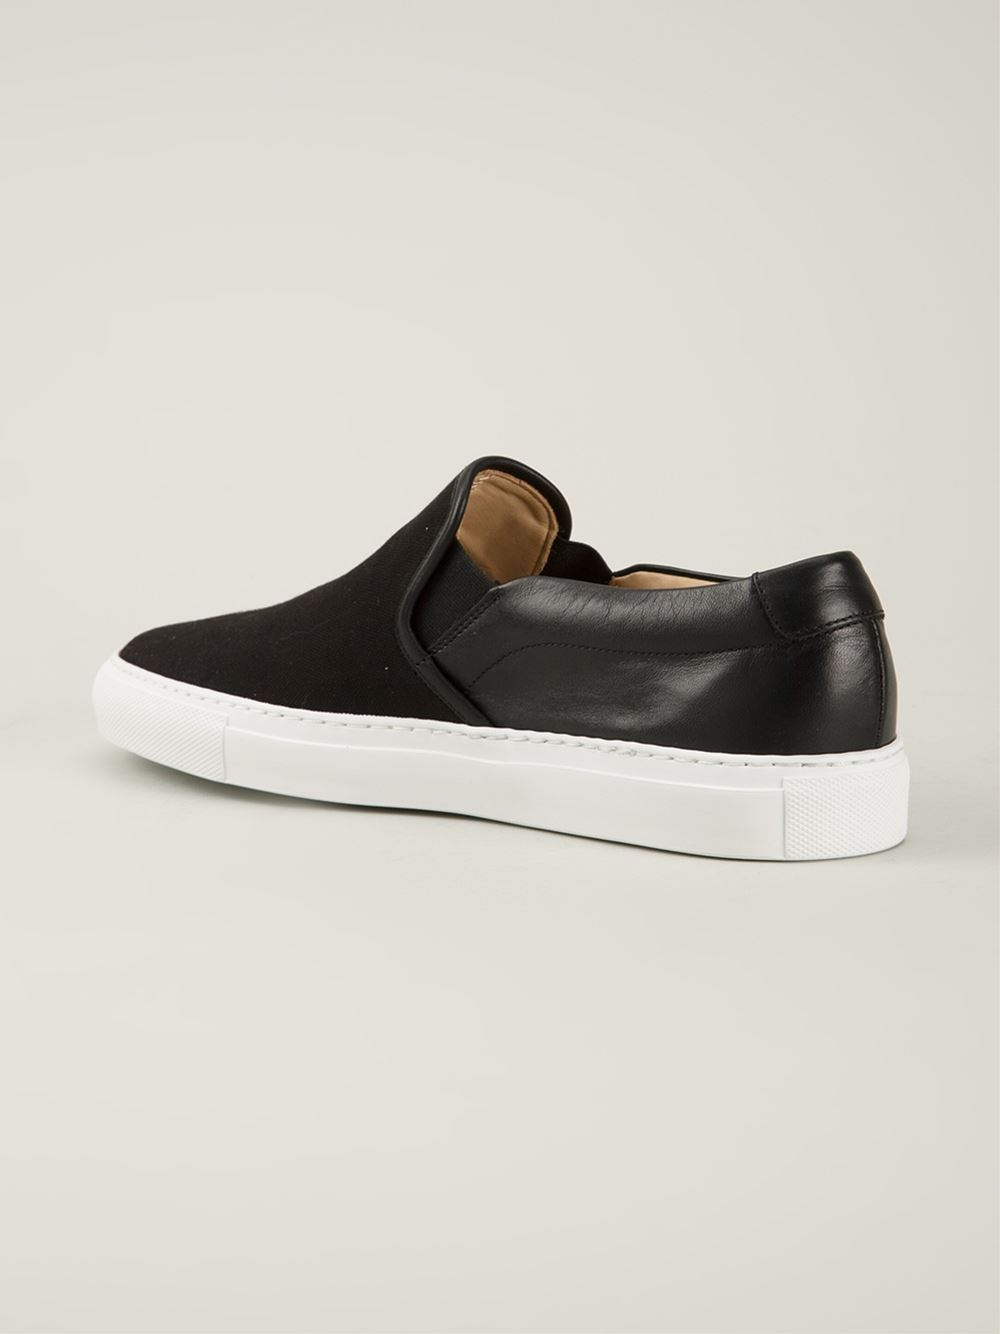 Common Projects Slip-On Sneakers in Black for Men | Lyst